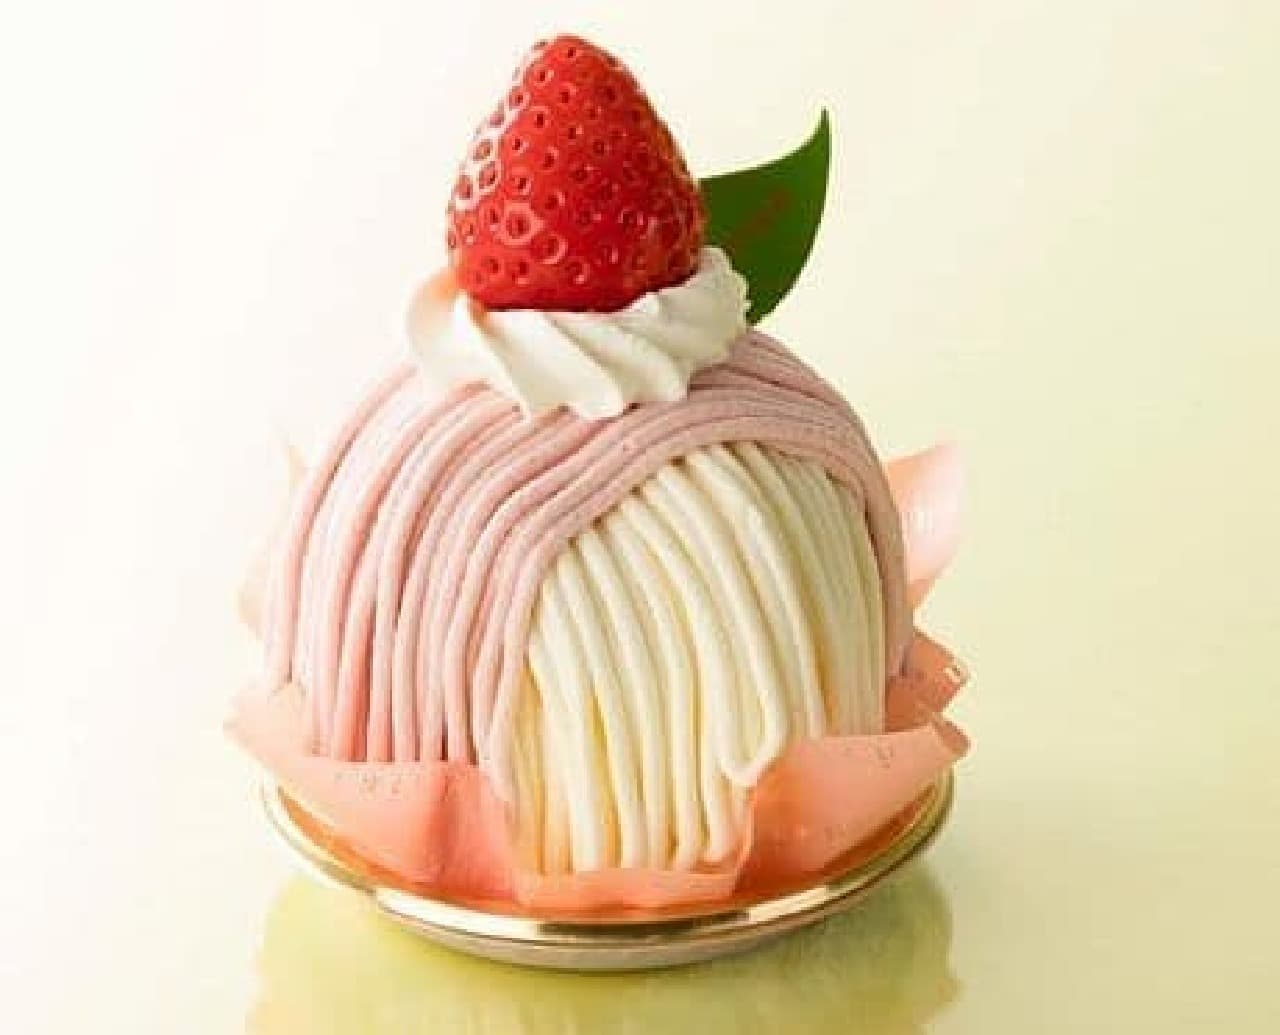 Chateraise "Strawberry and Milk Mont-Blanc